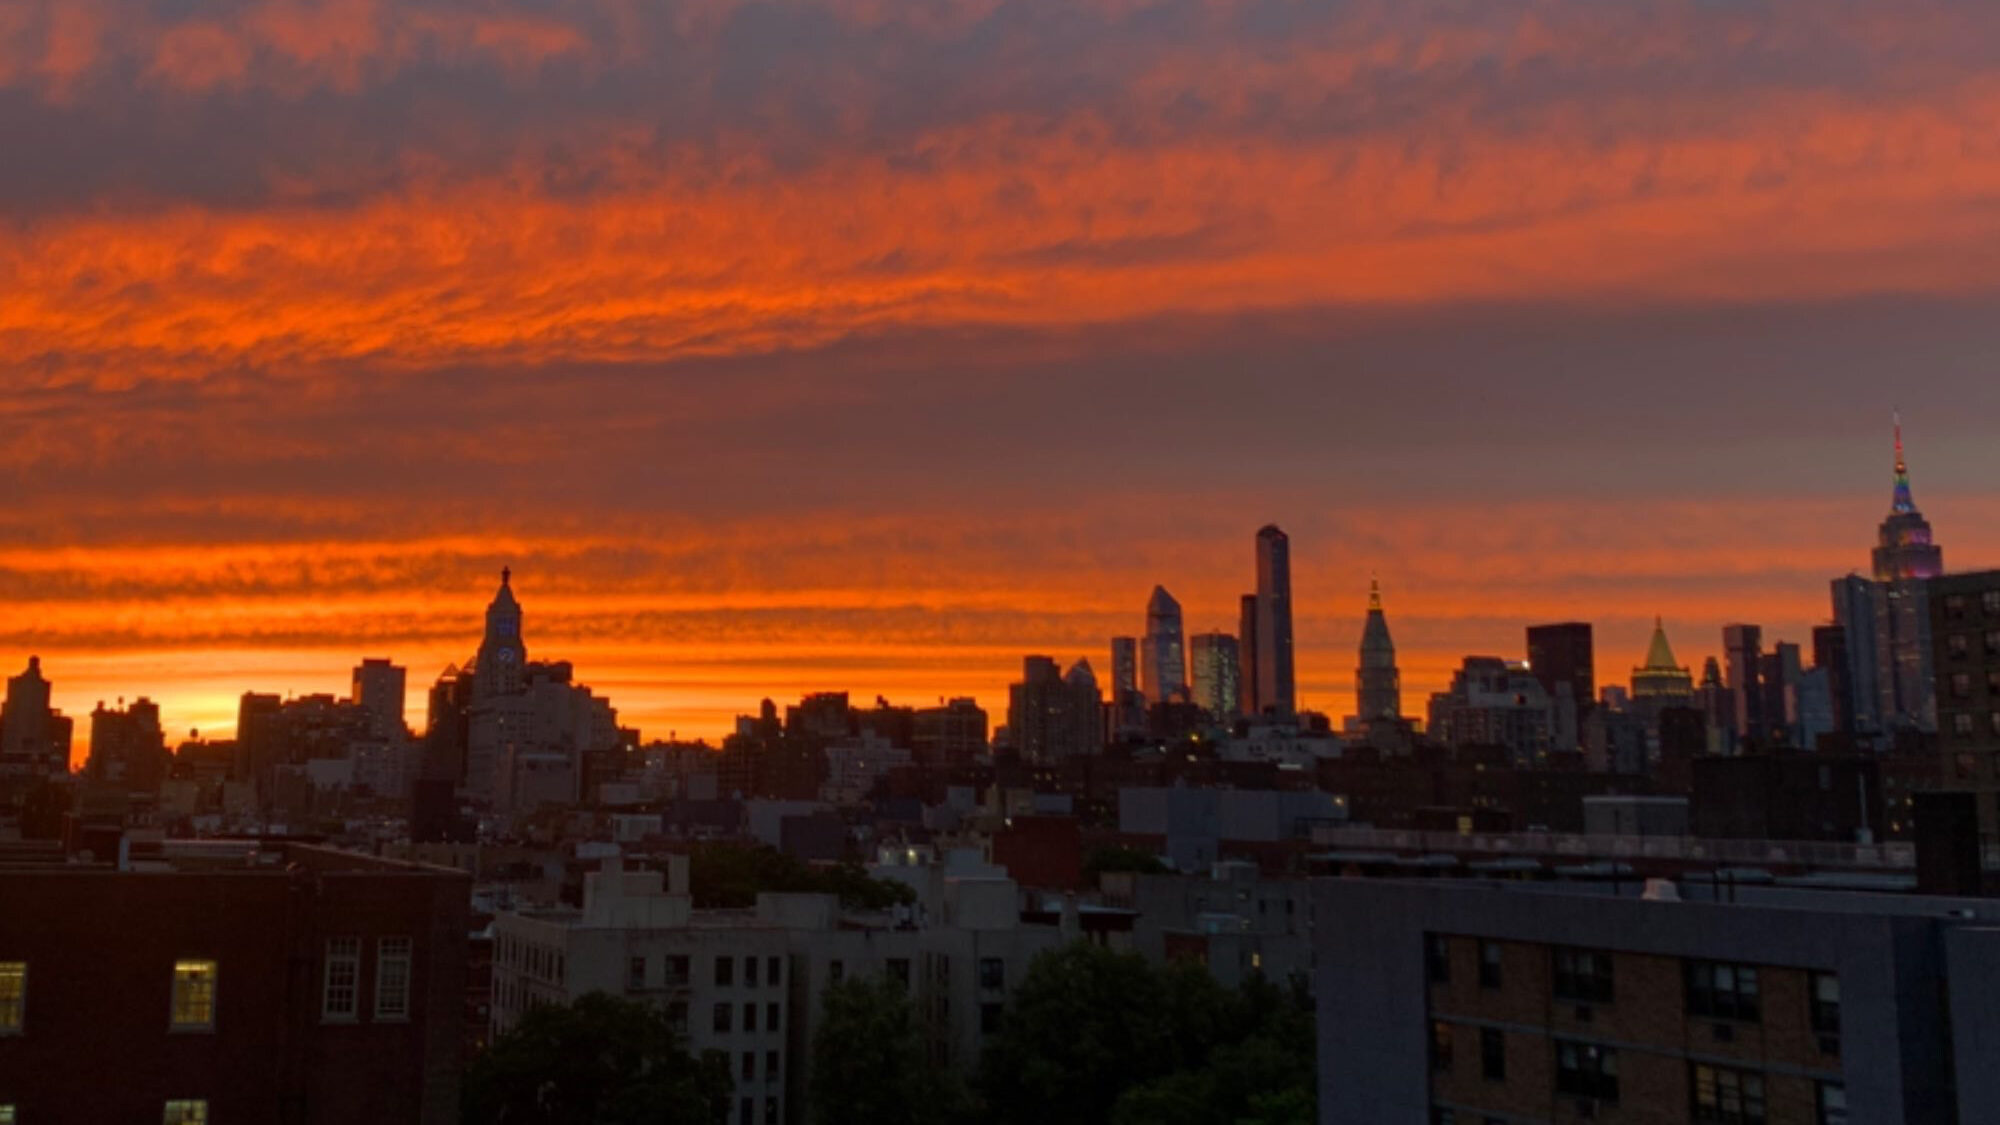 The sun sets over rooftops in New York City.